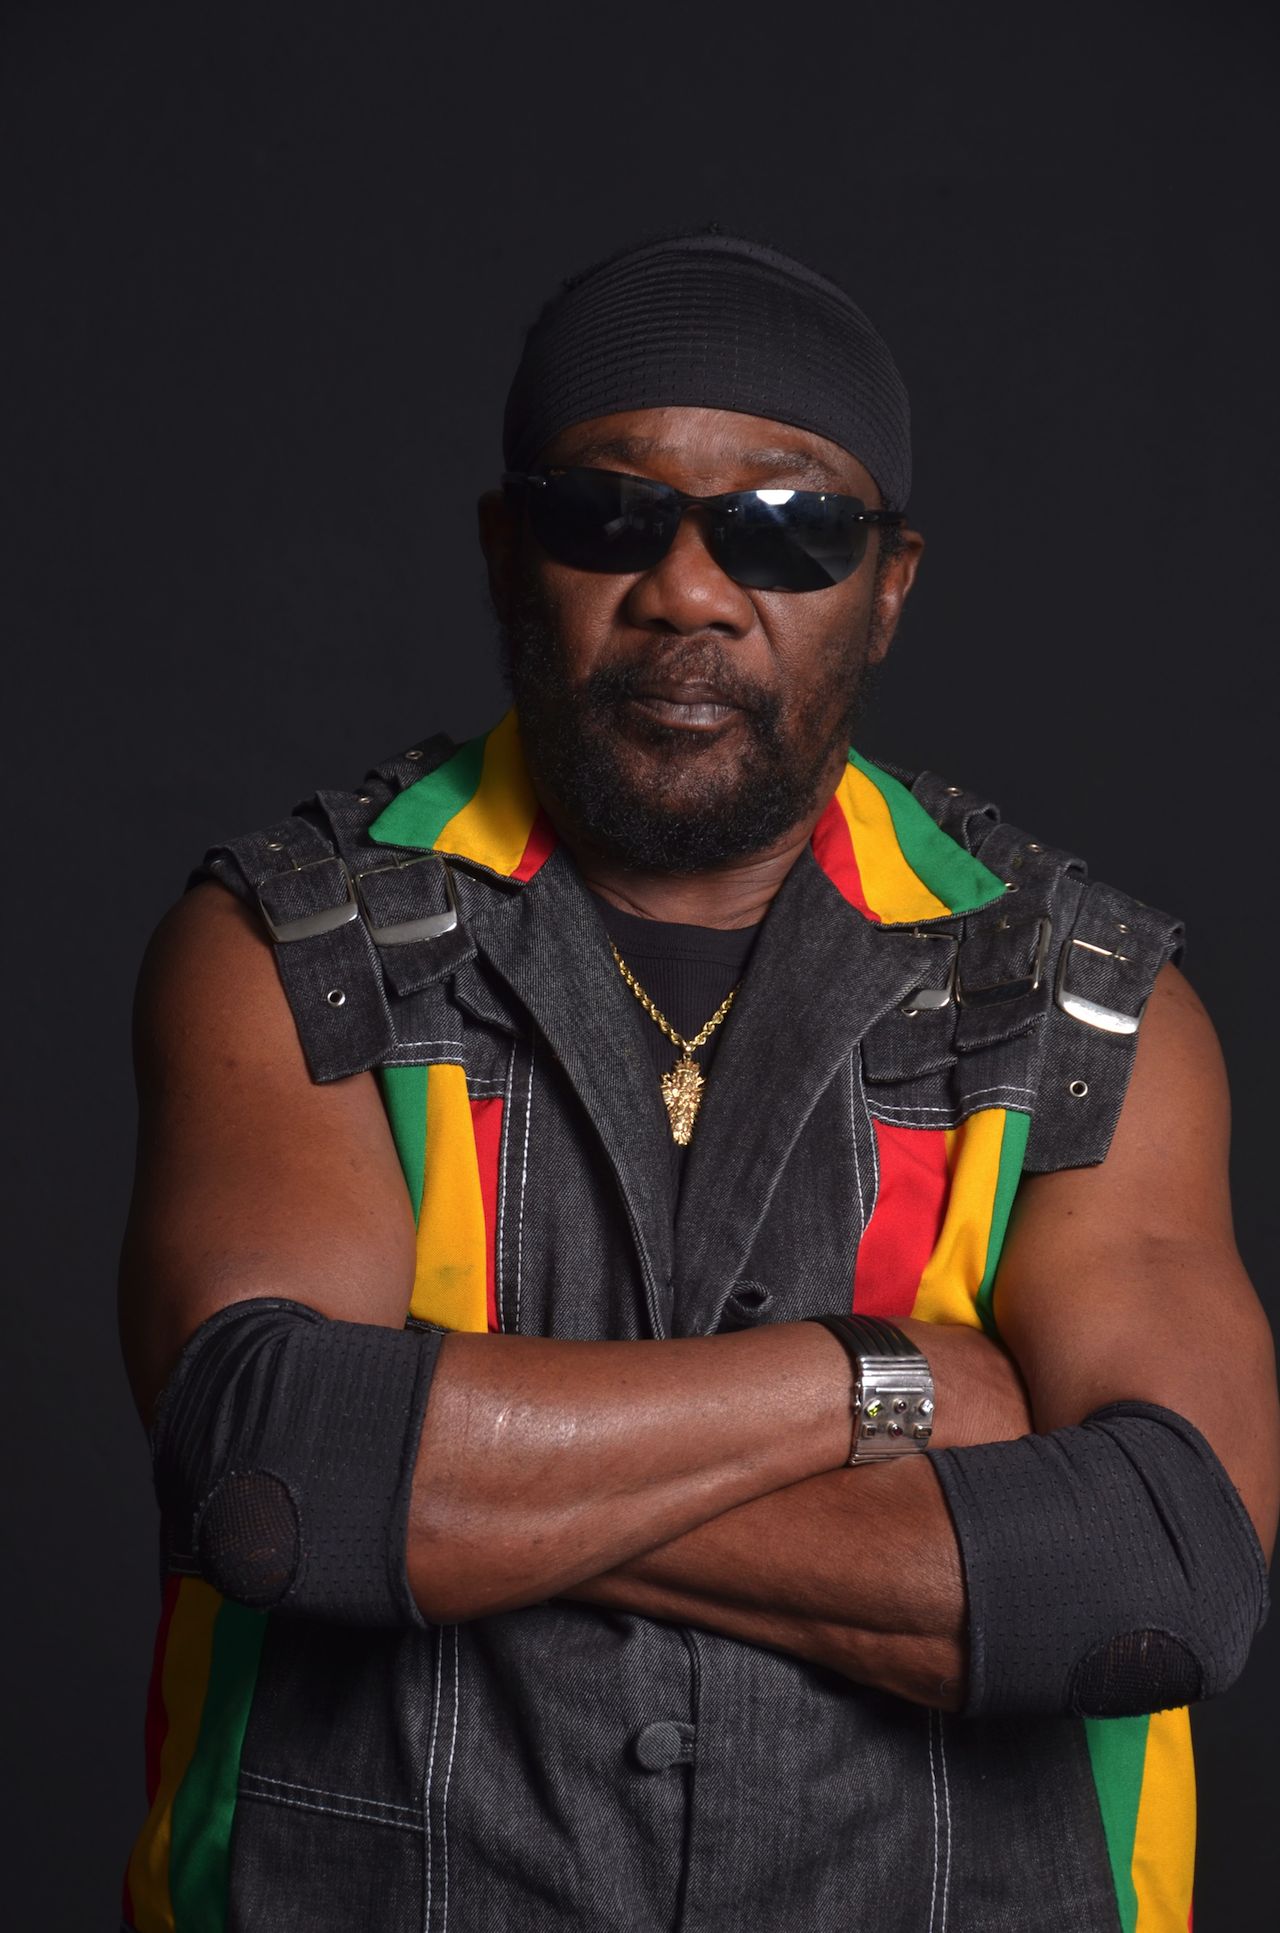 Toots Hibbert lands fifth Grammy nomination in reggae category